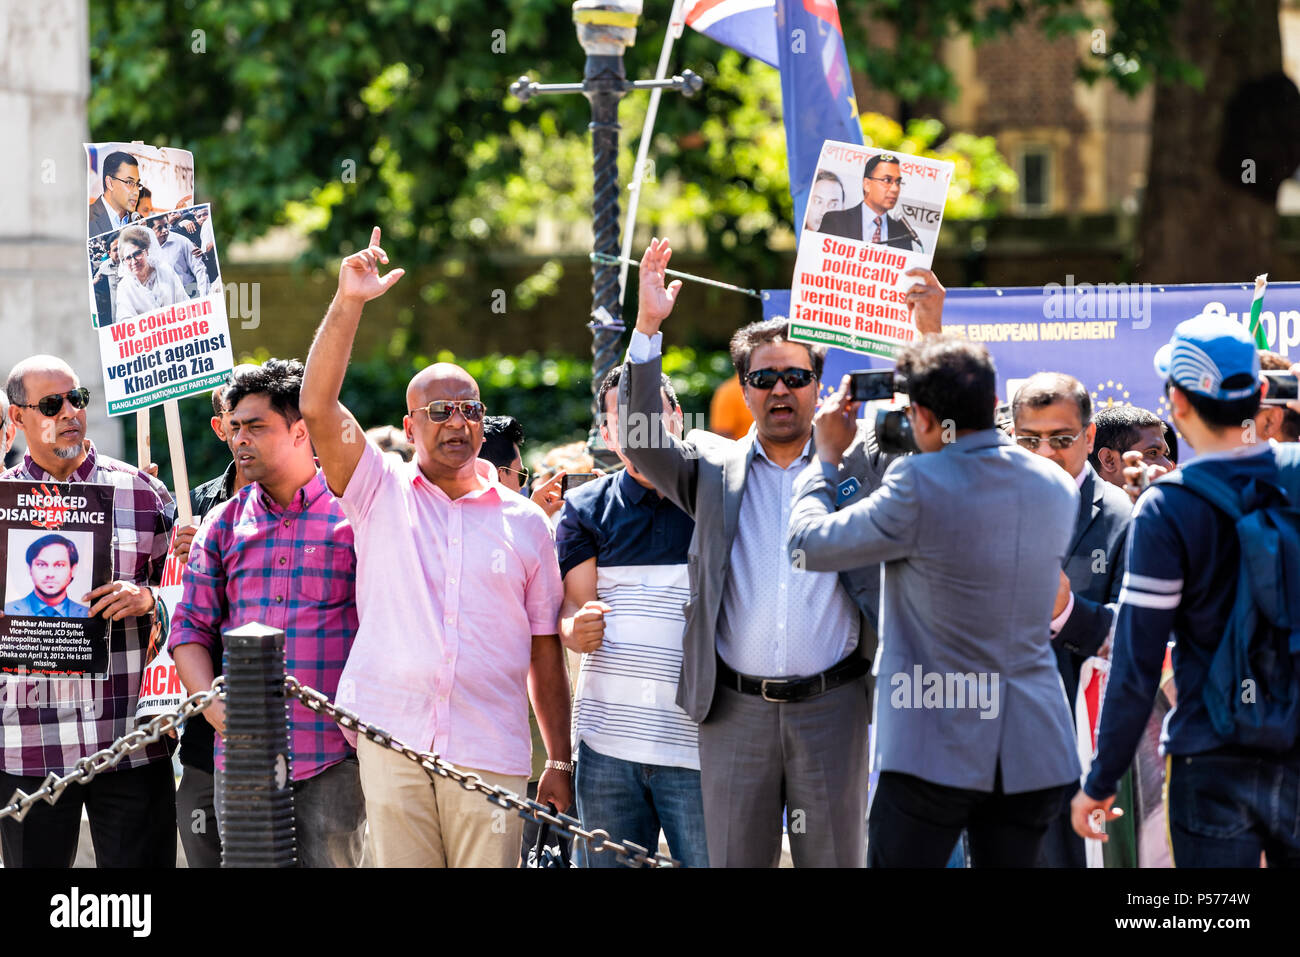 London, United Kingdom - June 25, 2018: People, men at Bangladesh protest in UK, England by Westminster with signs for releasing Begum Khaleda Zia, Terique Rahman Credit: Kristina Blokhin/Alamy Live News Stock Photo